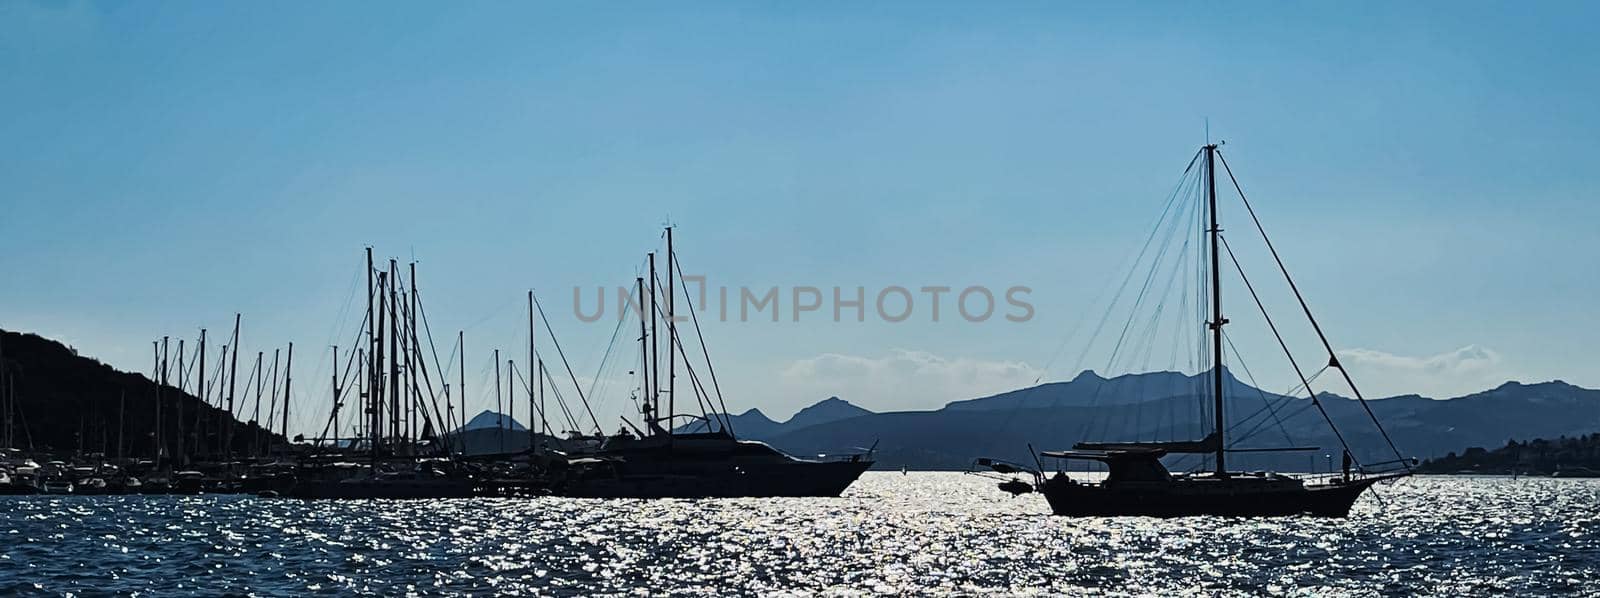 Tranquil seascape and coastal nature concept. Sea, boats, mountains and blue sky over horizon at sunset by Anneleven